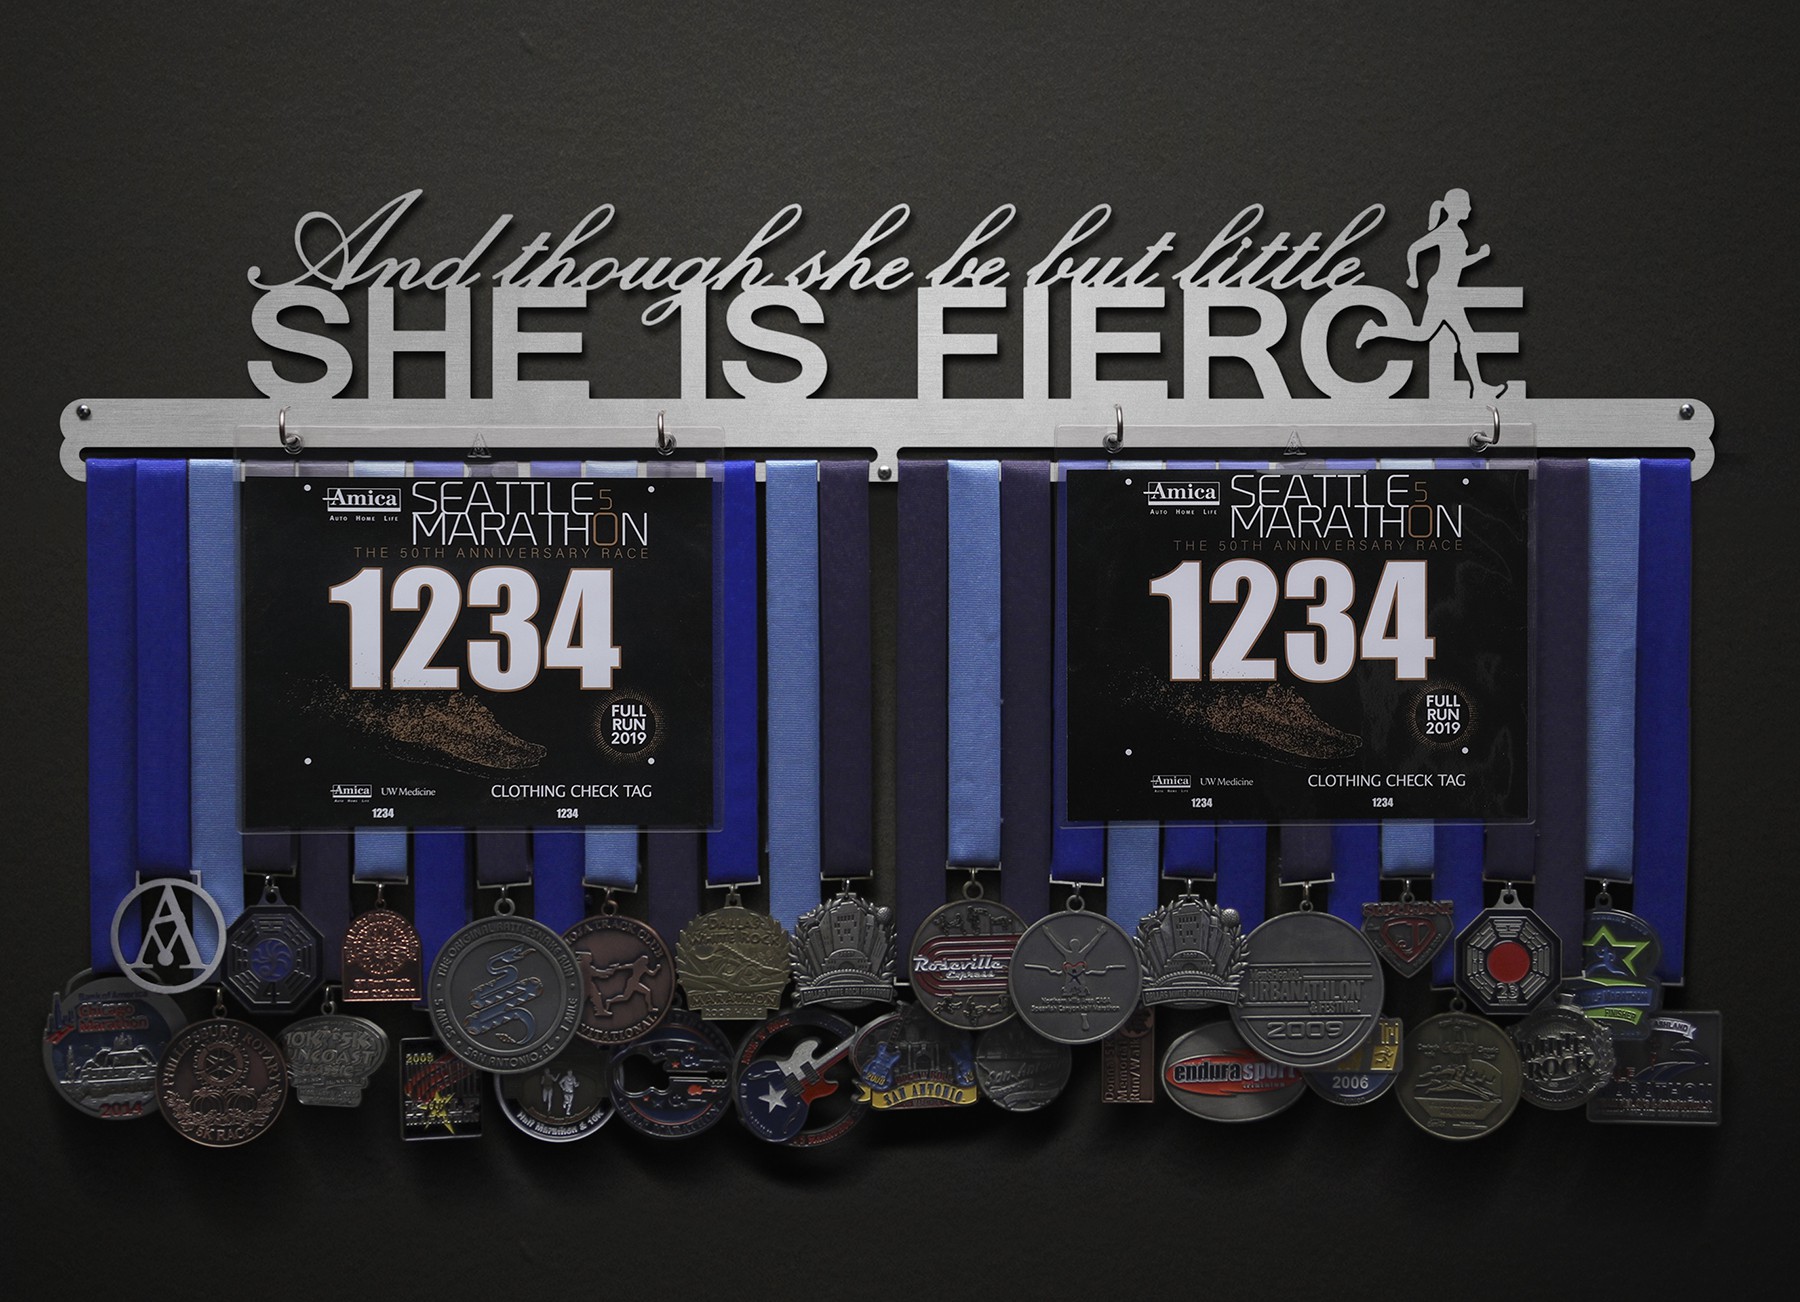 And Though She Be But Little, She Is Fierce Bib and Medal Display - with runner figure